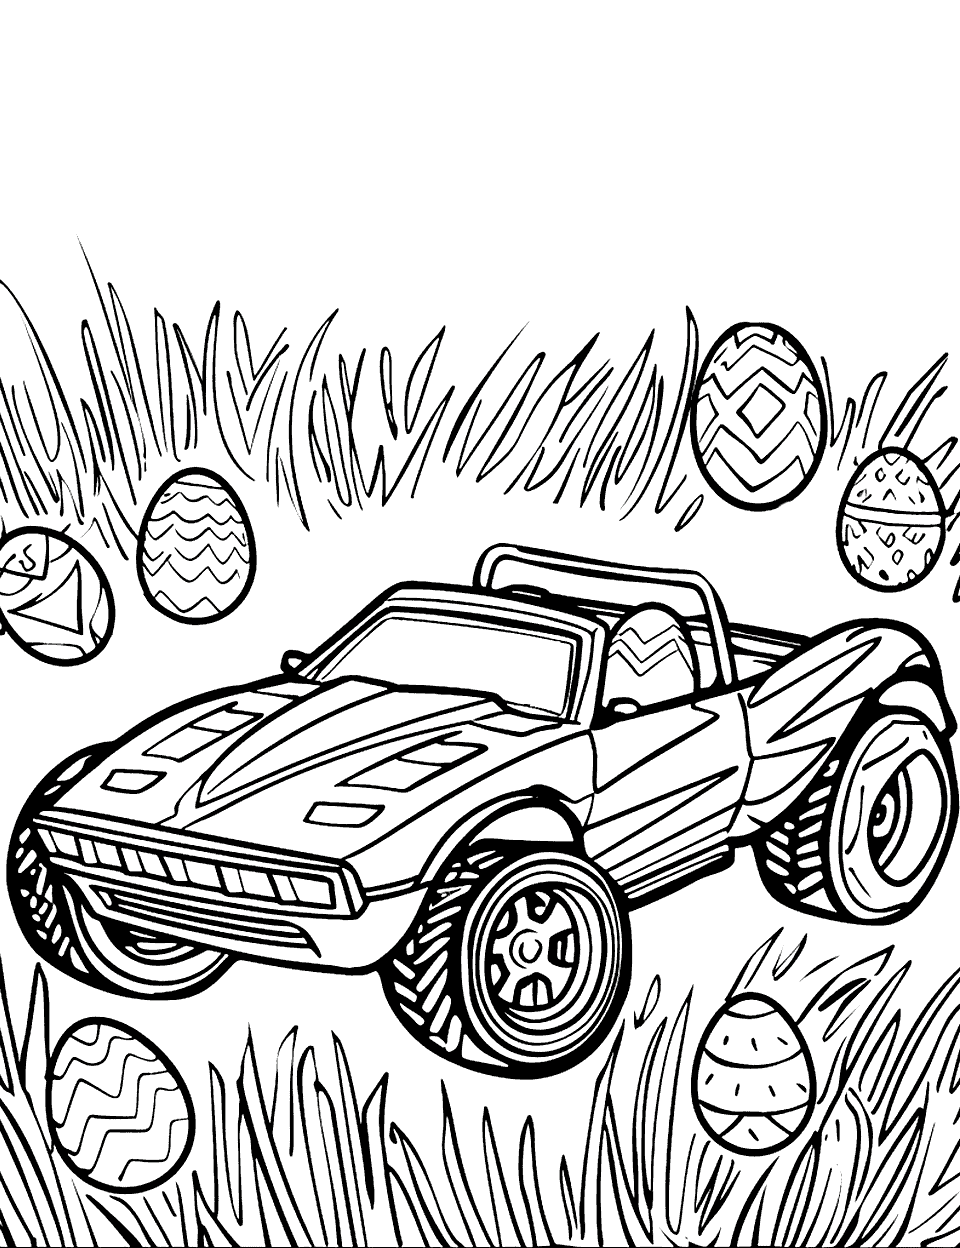 Easter Egg Hunt Coloring Page - A Hot Wheels car hidden among Easter eggs in a grassy field, ready for the hunt.